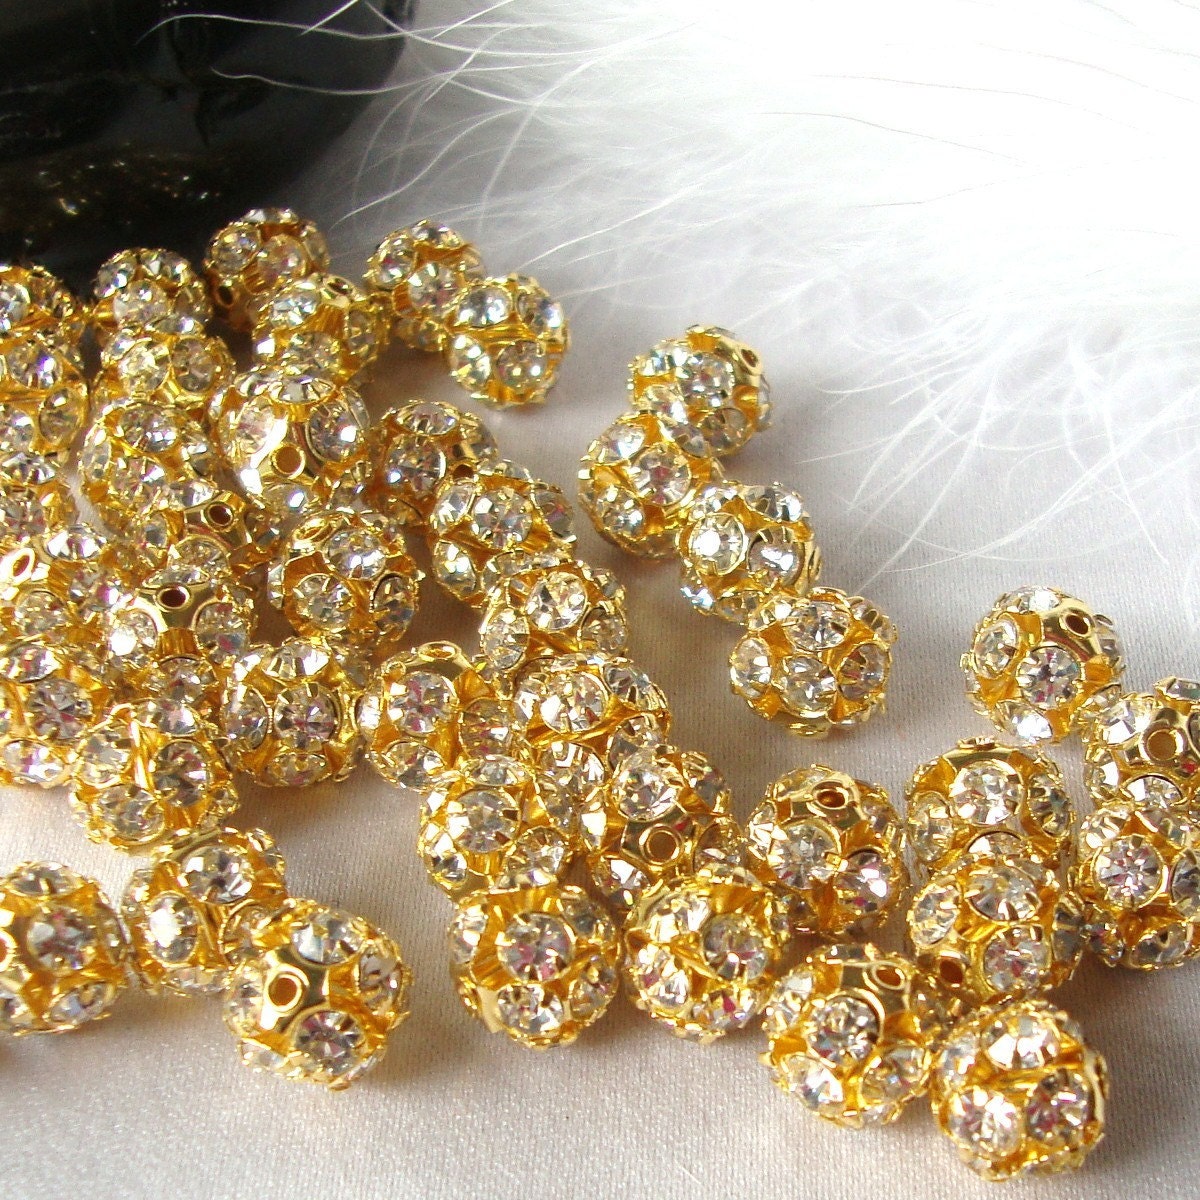 10 pc Gold Plated Crystal Rhinestone Disco Ball Spacer Beads